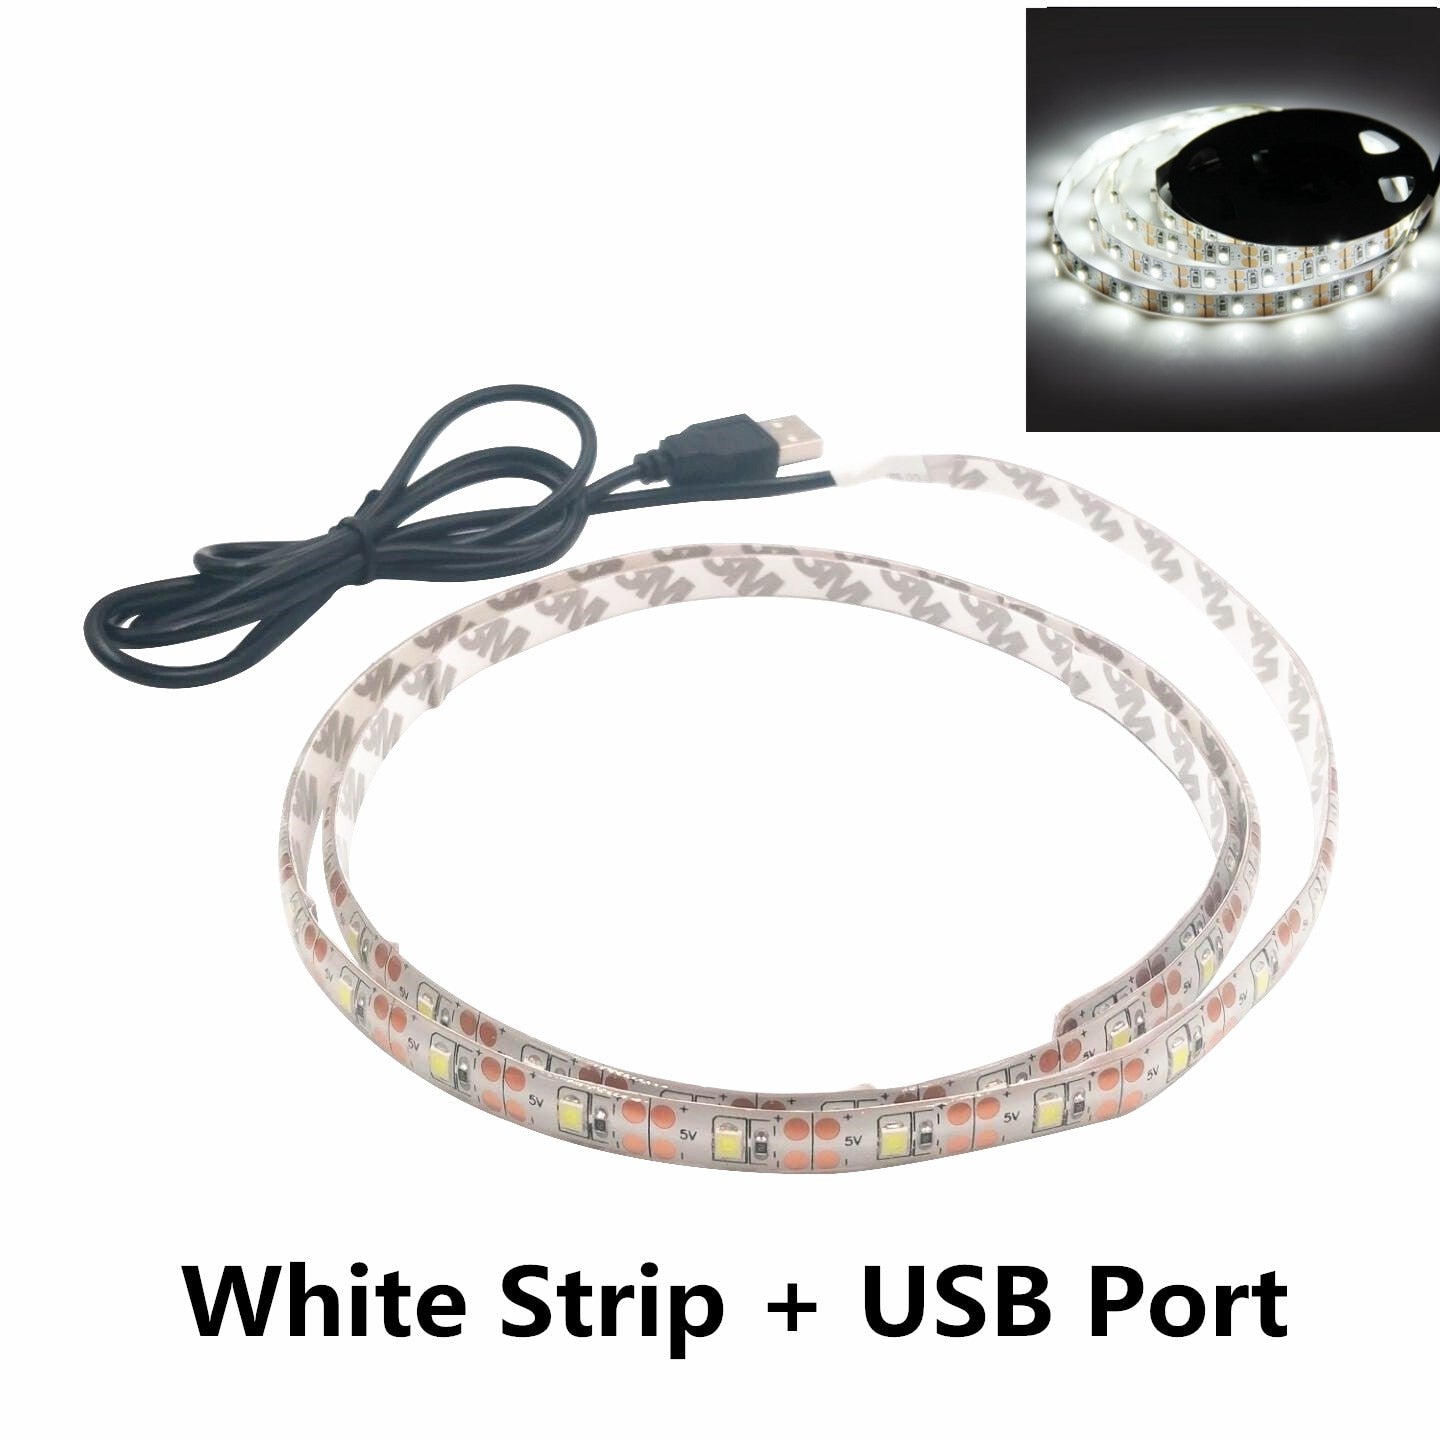 16 Color Changing LED Strip Light with IR Remote